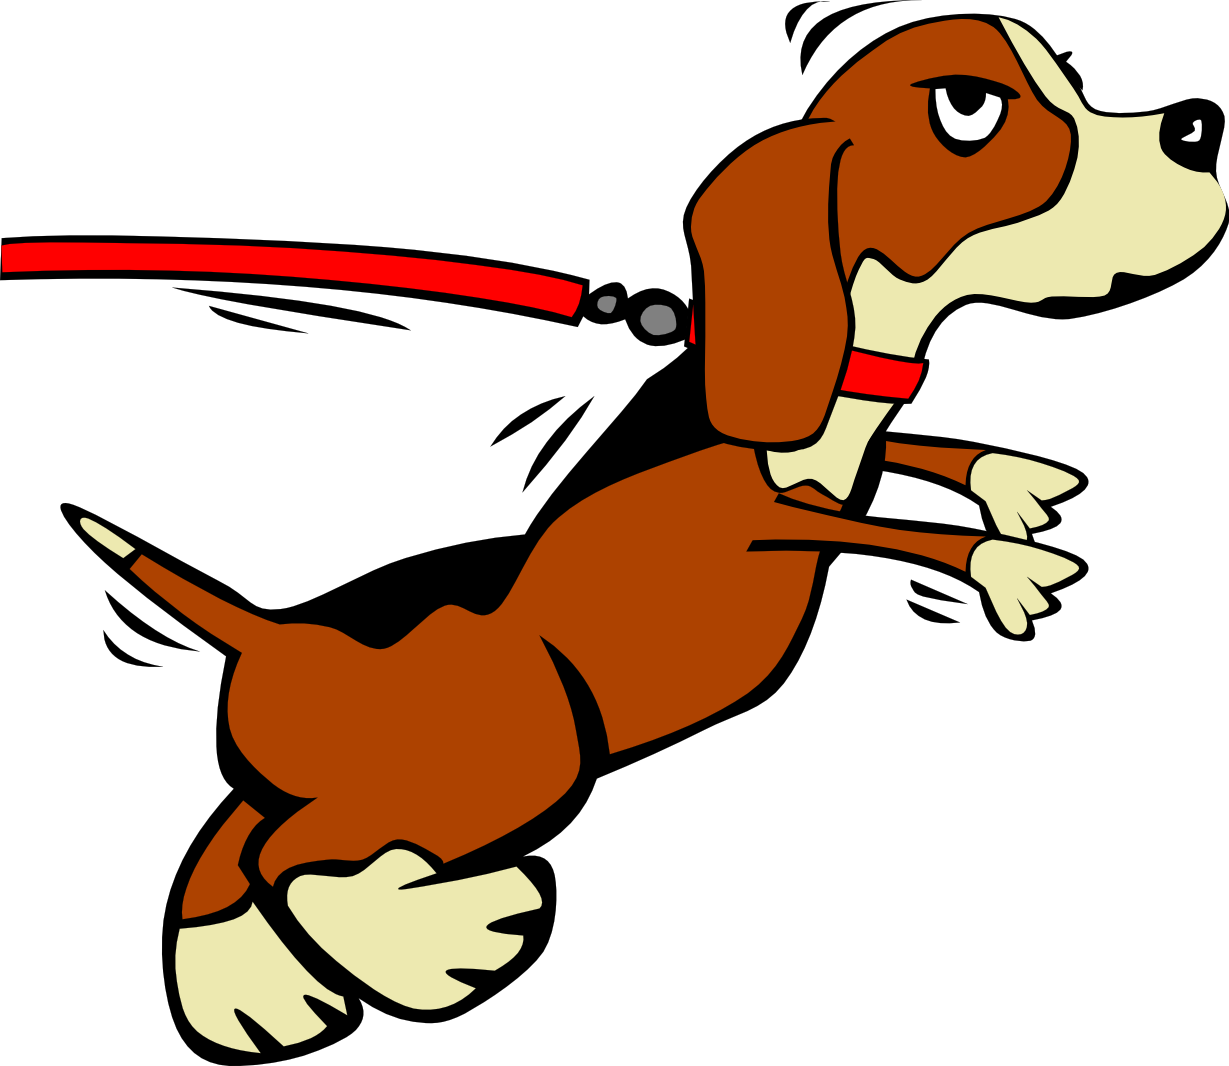 Upset Cartoon Dog Images & Pictures - Becuo